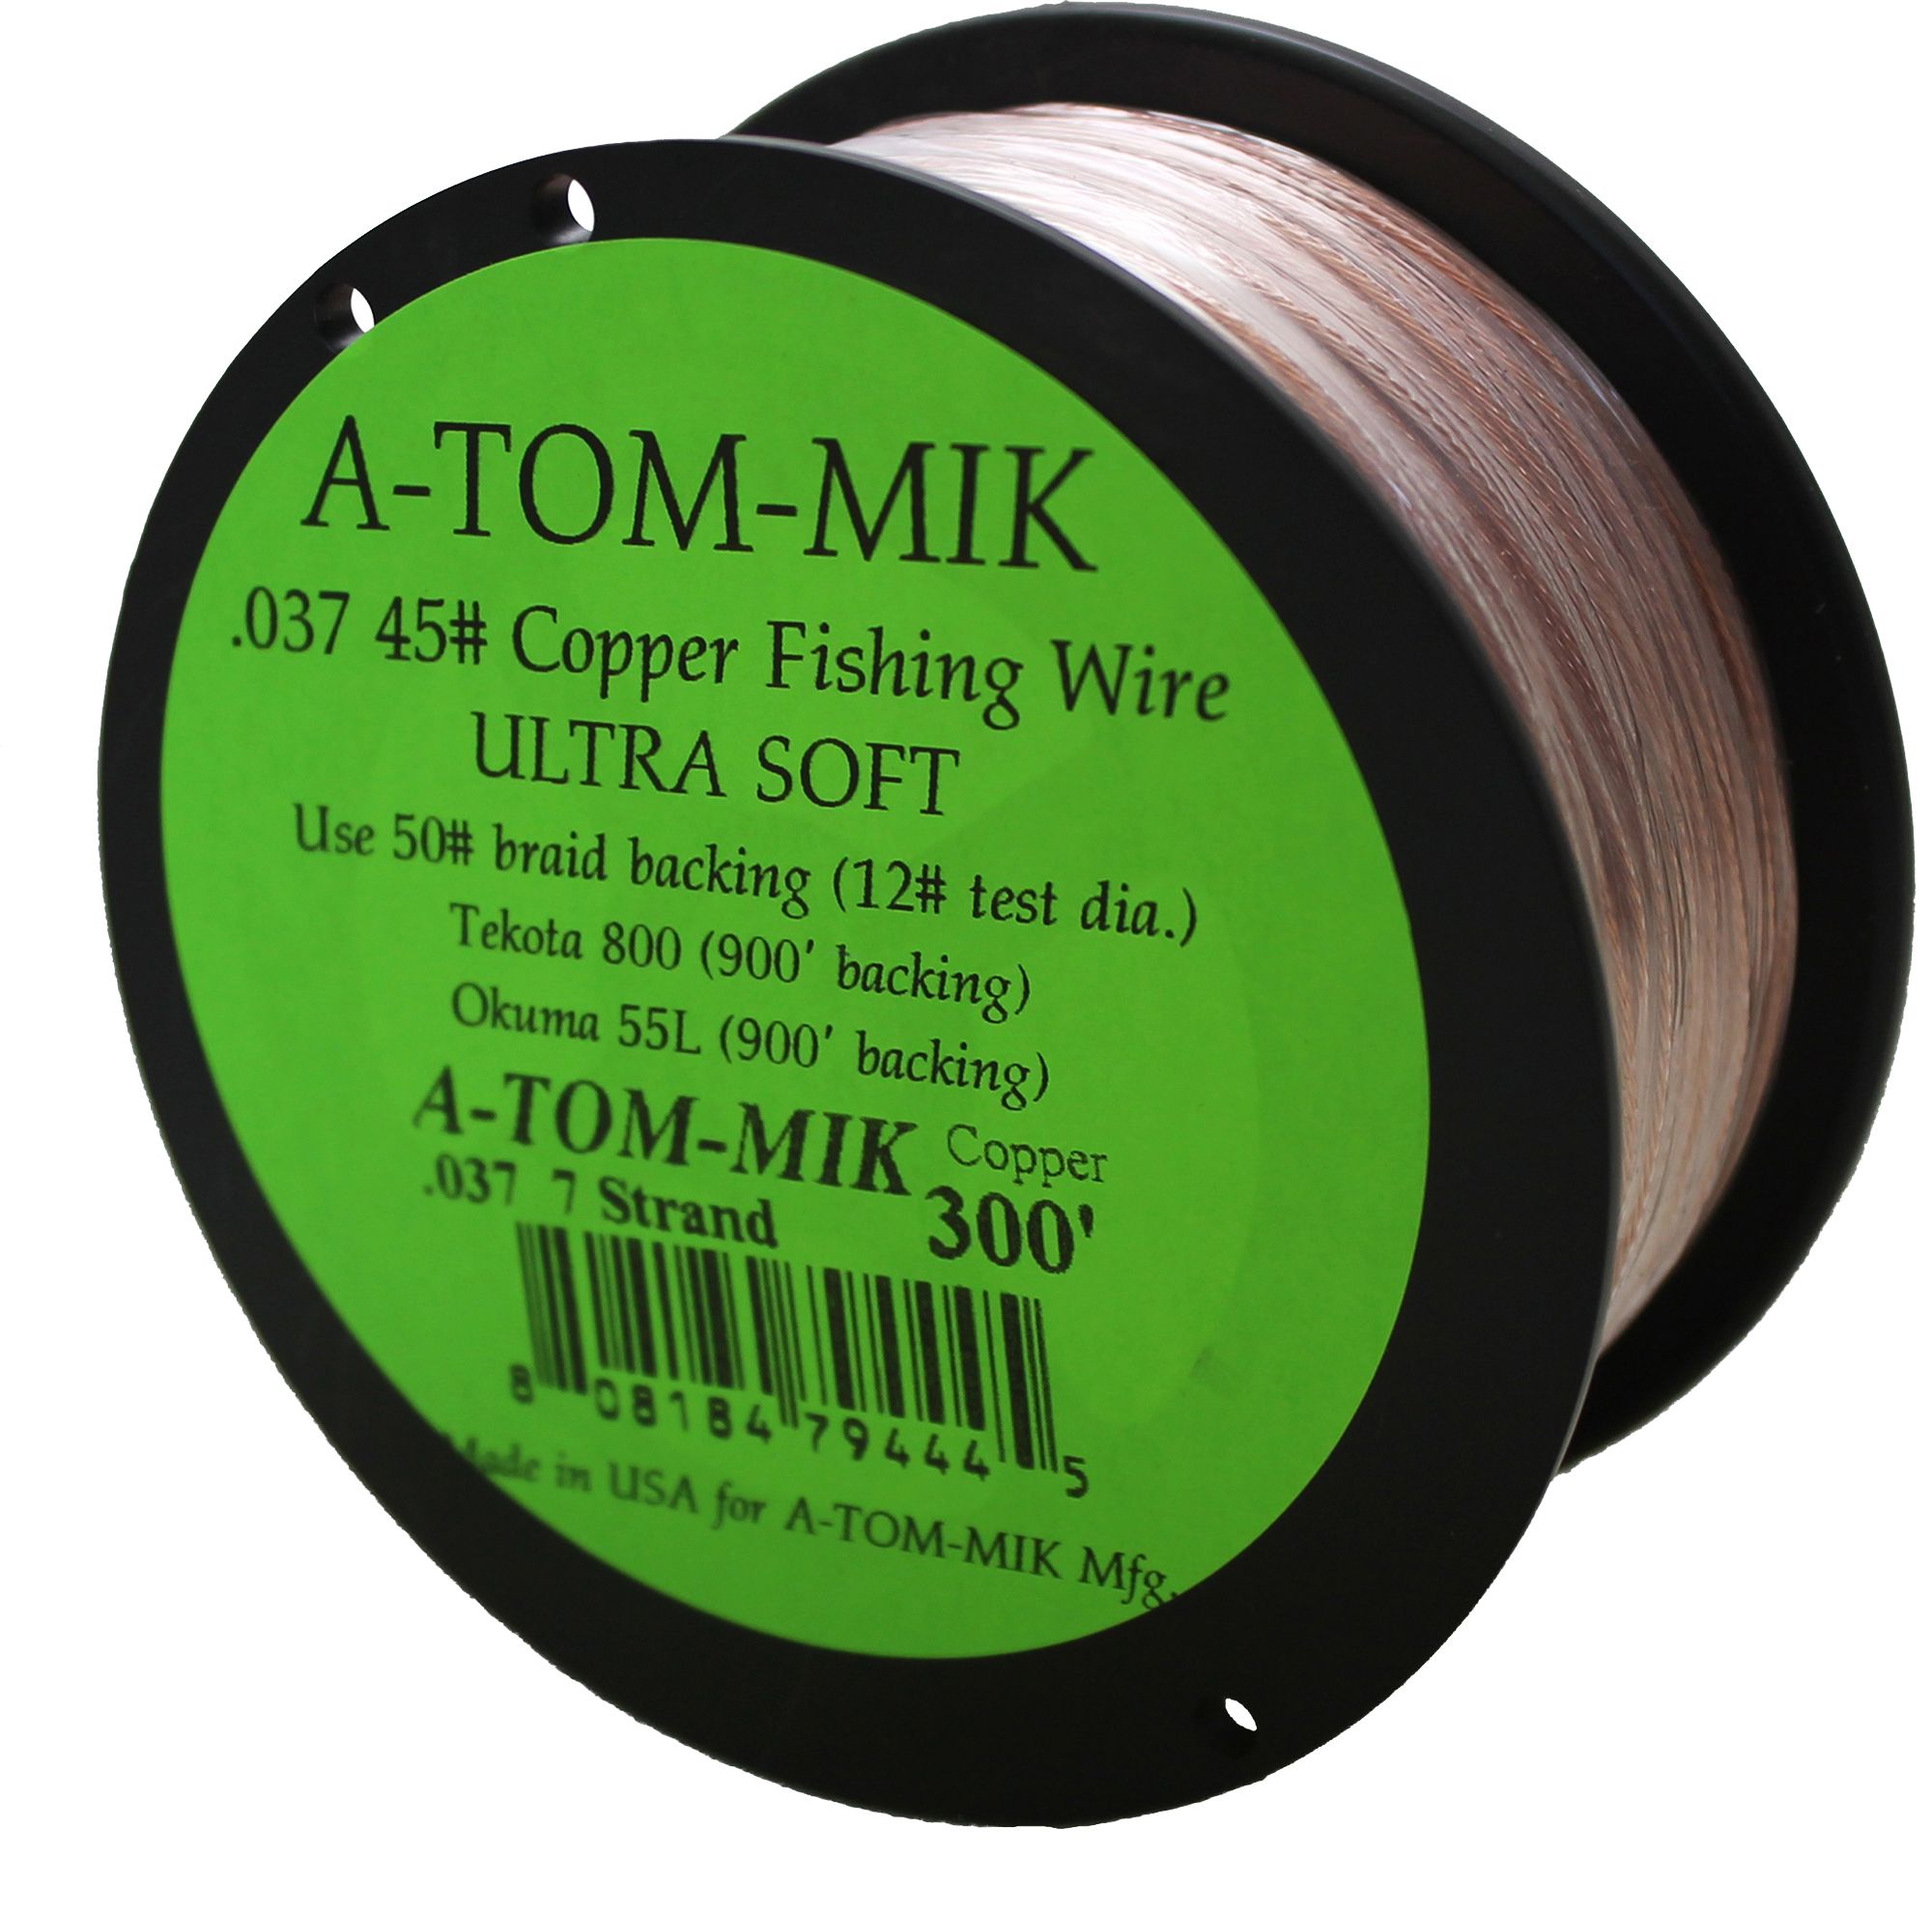 Dick's Sporting Goods A-TOM-MIK Copper Fishing Wire Line-300